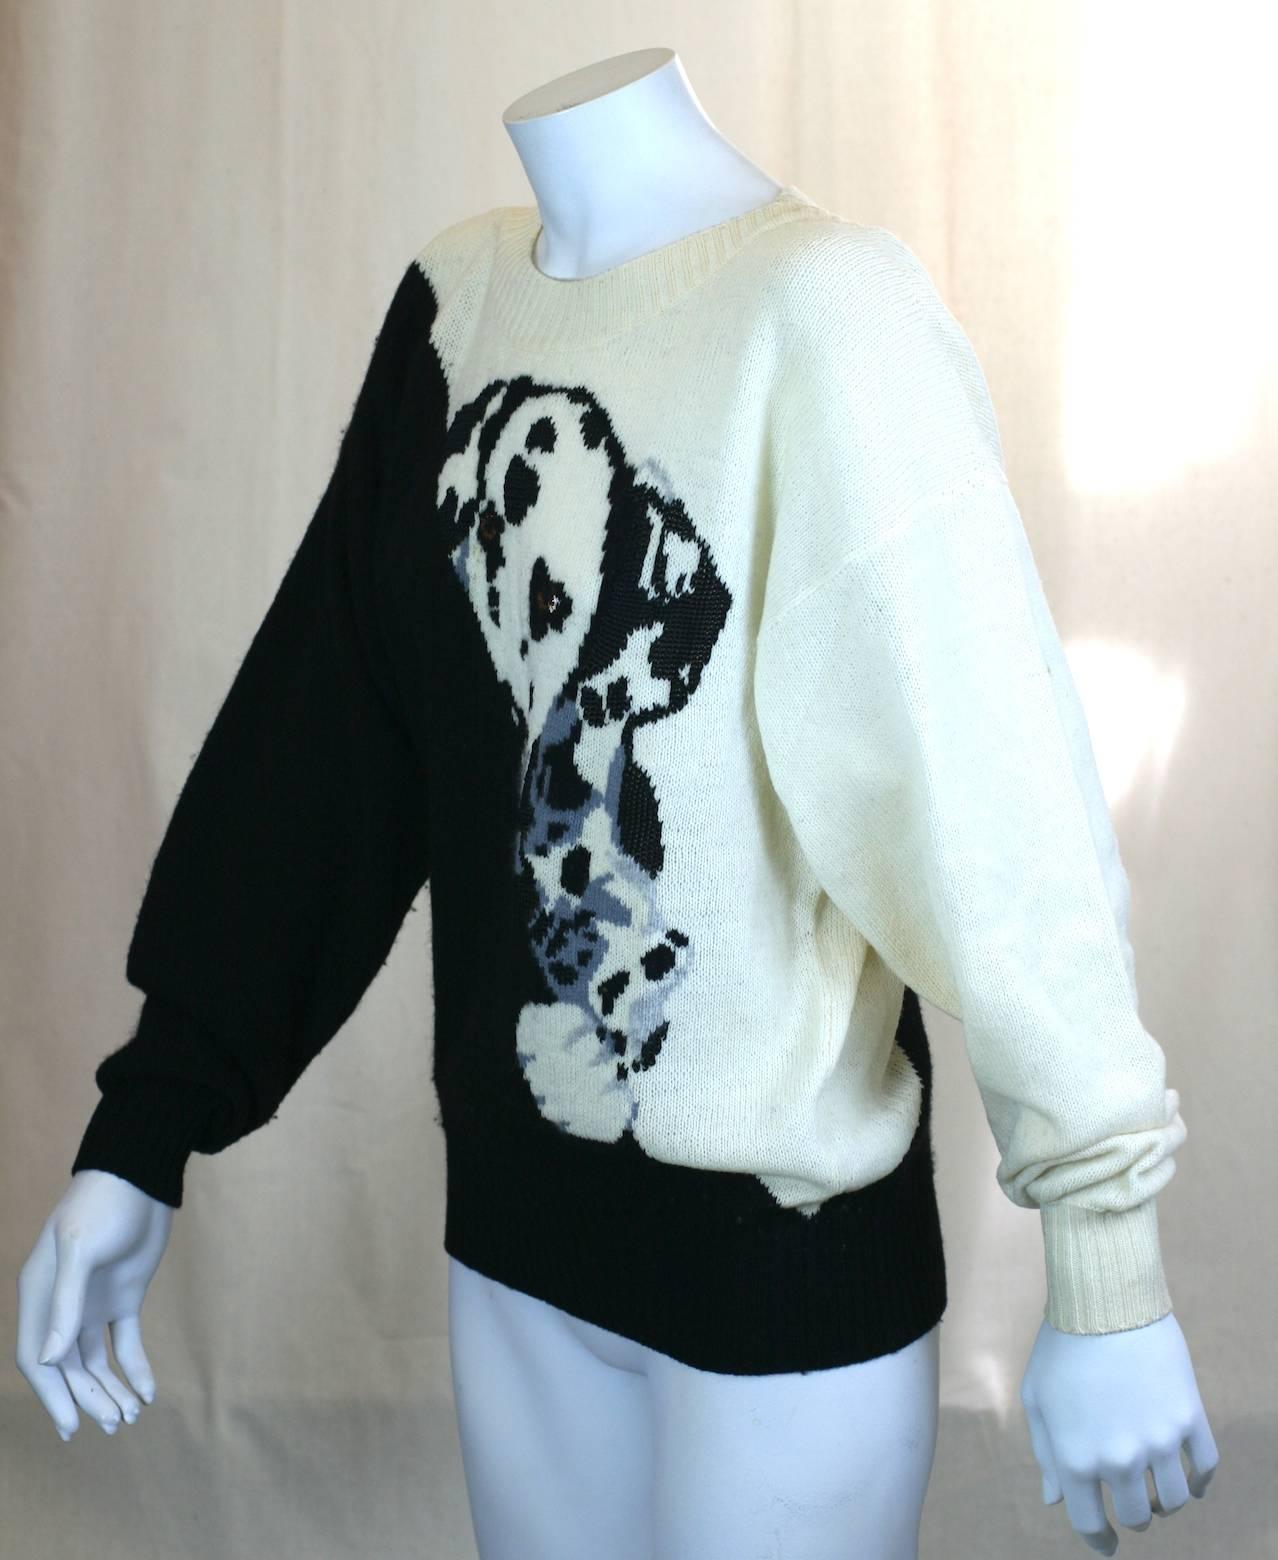 Krizia inquisitive peeking dalmation puppy intarsia knit pullover, the black and white puppy peeking over the black diagonal sweater front. Ribbed knit cuffs and hem. Modified dolman sleeves. 1980's Italy. Made in Italy, Iconic Krizia Motif. 
Wool